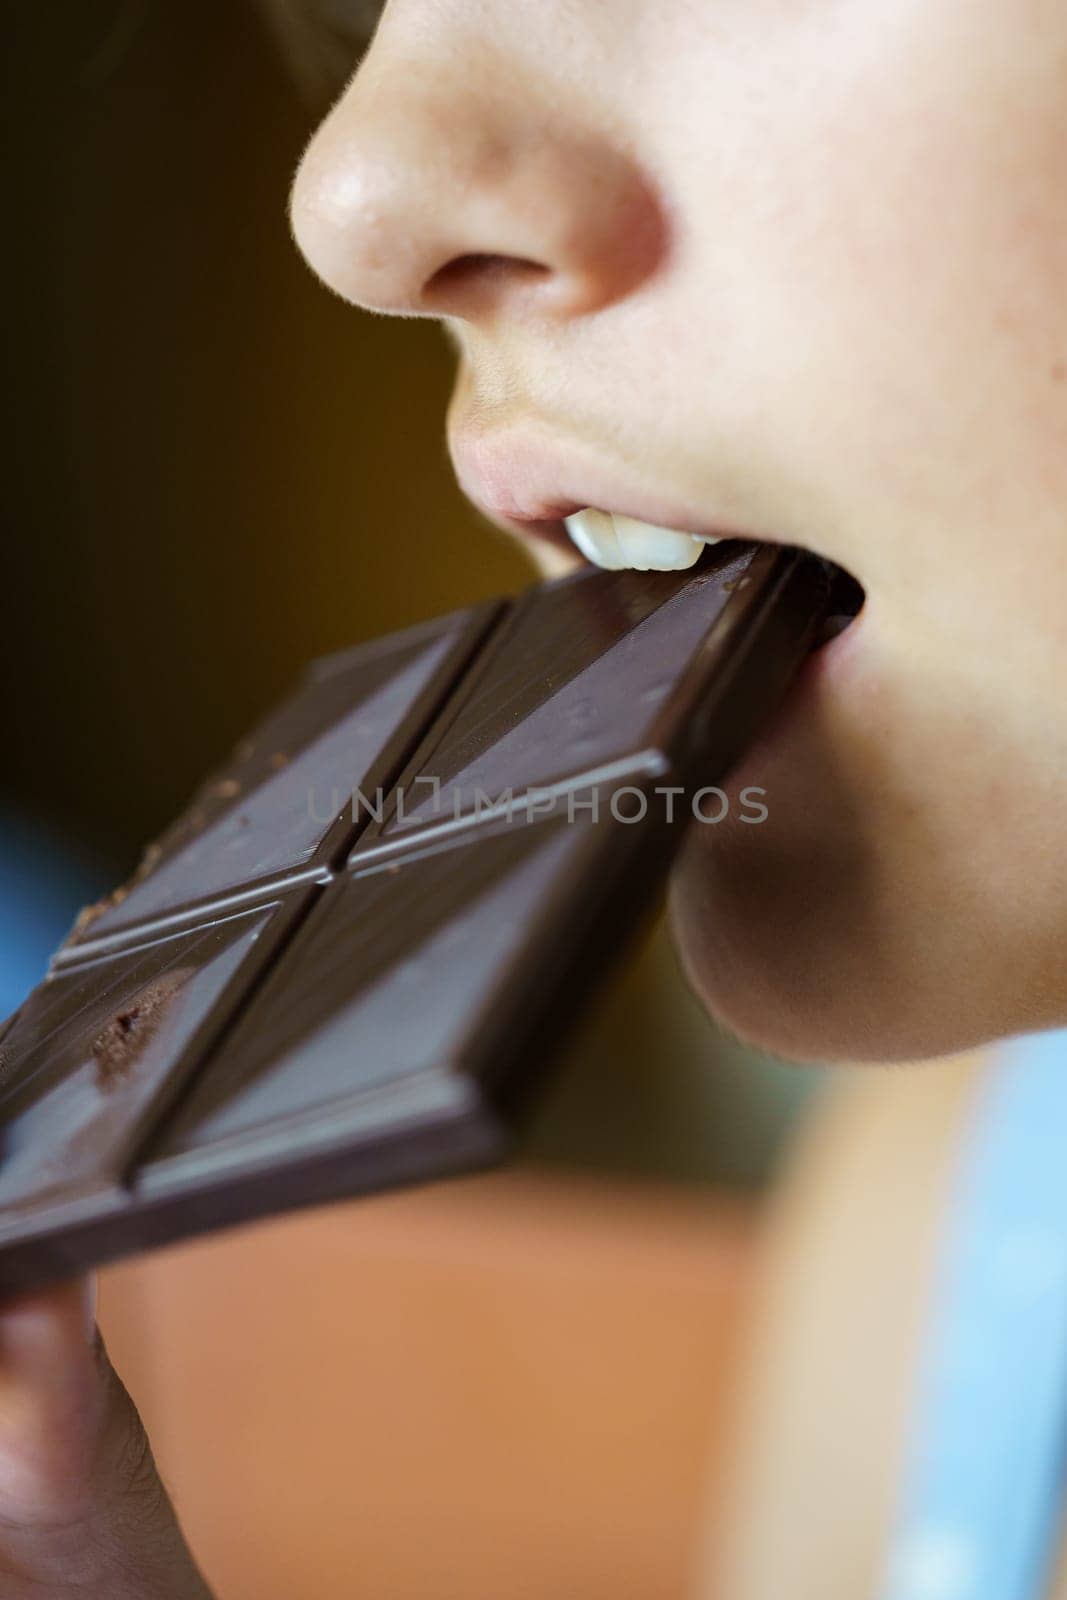 Anonymous girl biting yummy chocolate bar at home by javiindy